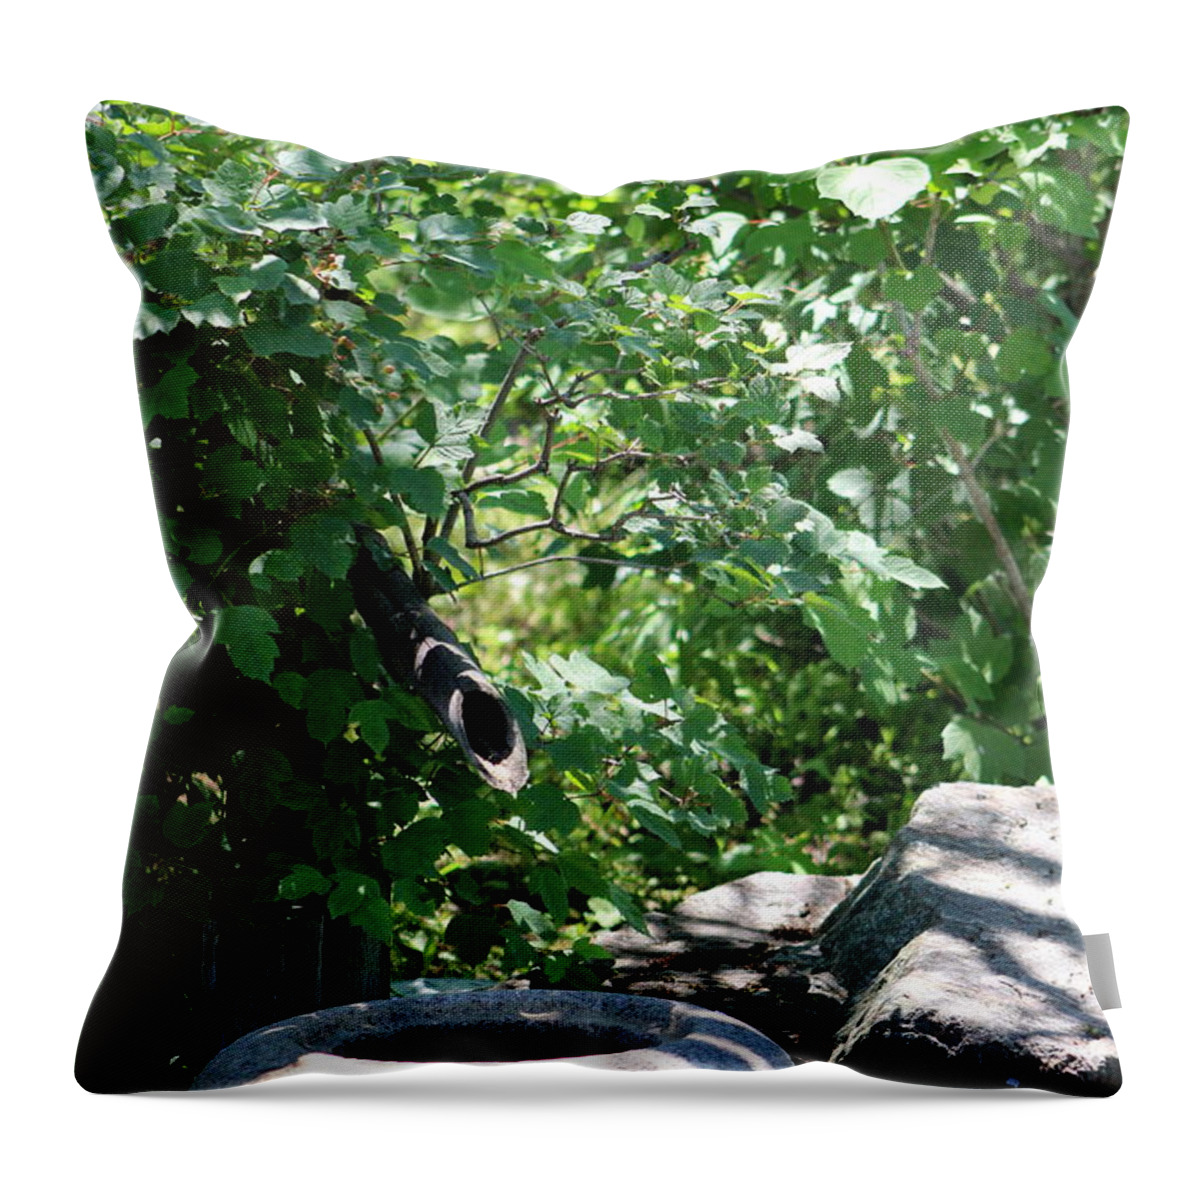 Stone Basin Throw Pillow featuring the photograph Stone Water Basin by Colleen Cornelius